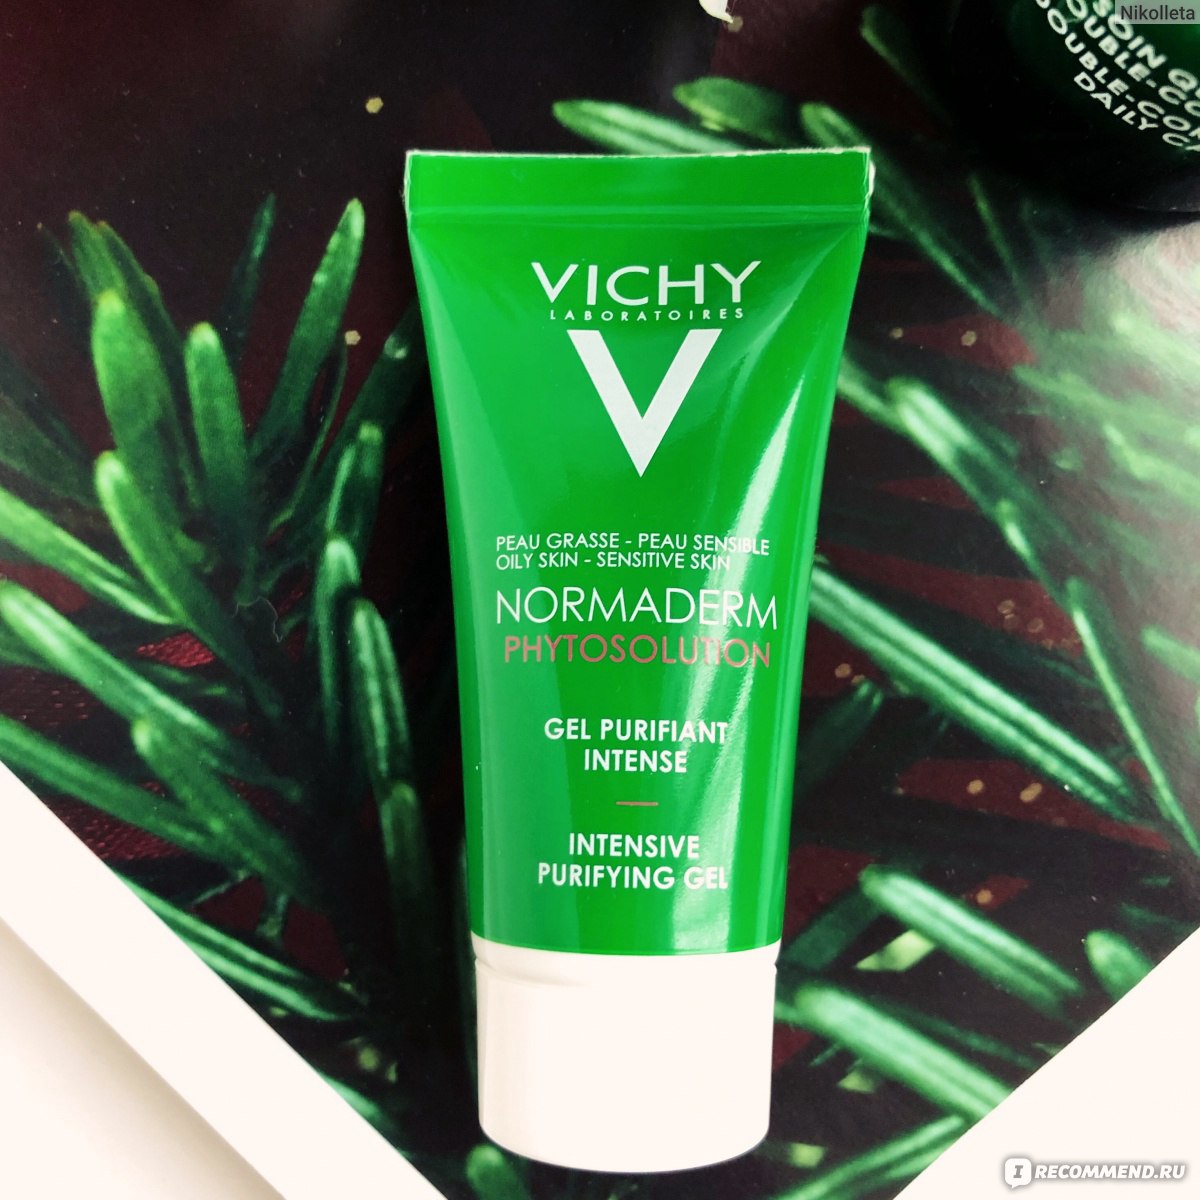 Normaderm phytosolution intensive purifying gel. Виши умывалка Normaderm. Normaderm Vichy 3 мл. Виши Нормадерм интенсив Purifying. Vichy Normaderm phytosolution Gel.